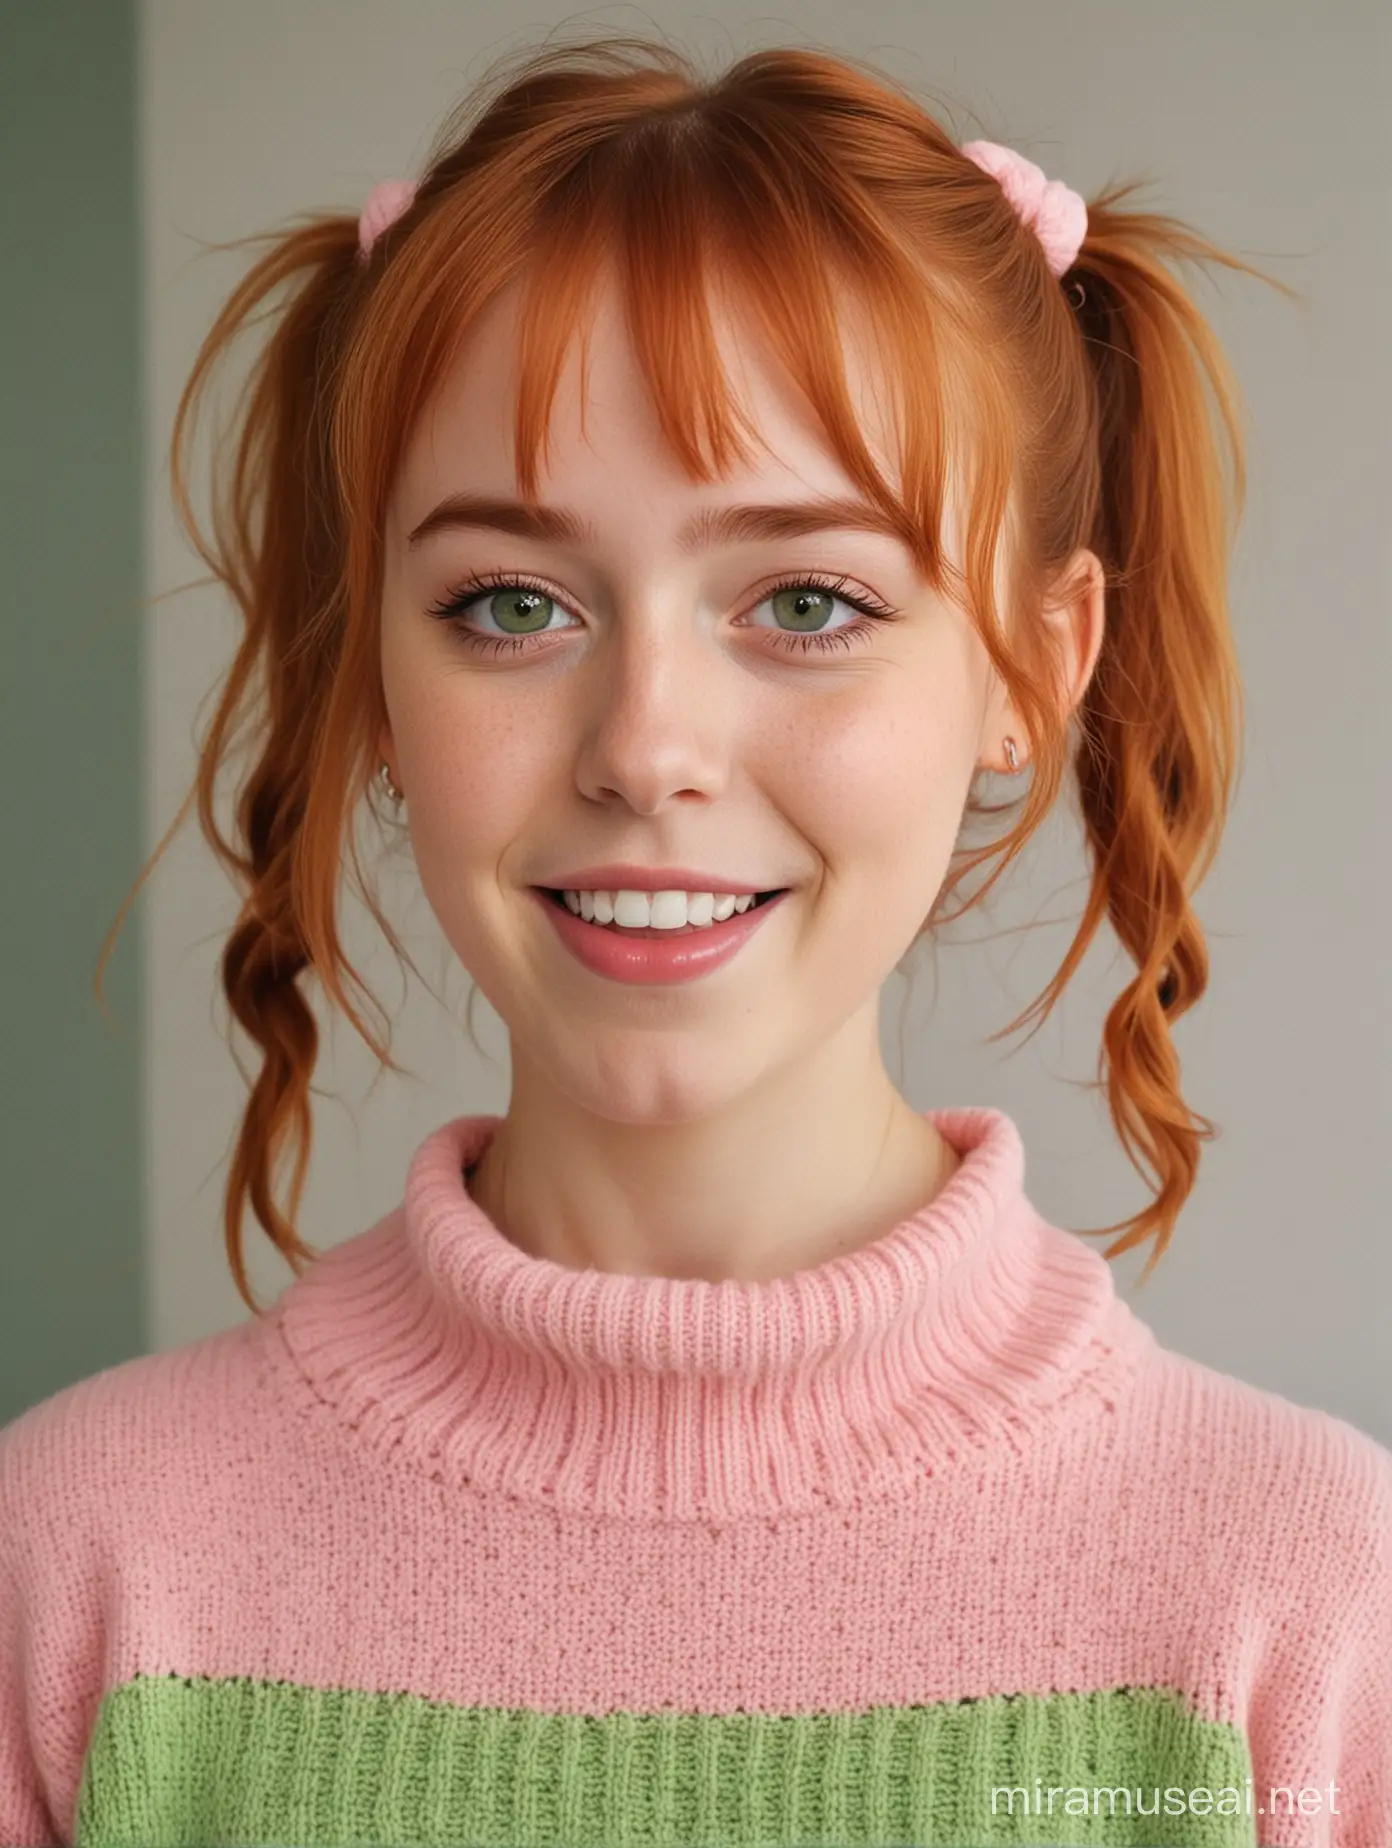 a boy who looks like a girl wearing a pink knitted chunky turtle neck sweater dress she has ginger hair in pigtails and bangs and green eyes, she is smiling and showing her tongue in a shy way